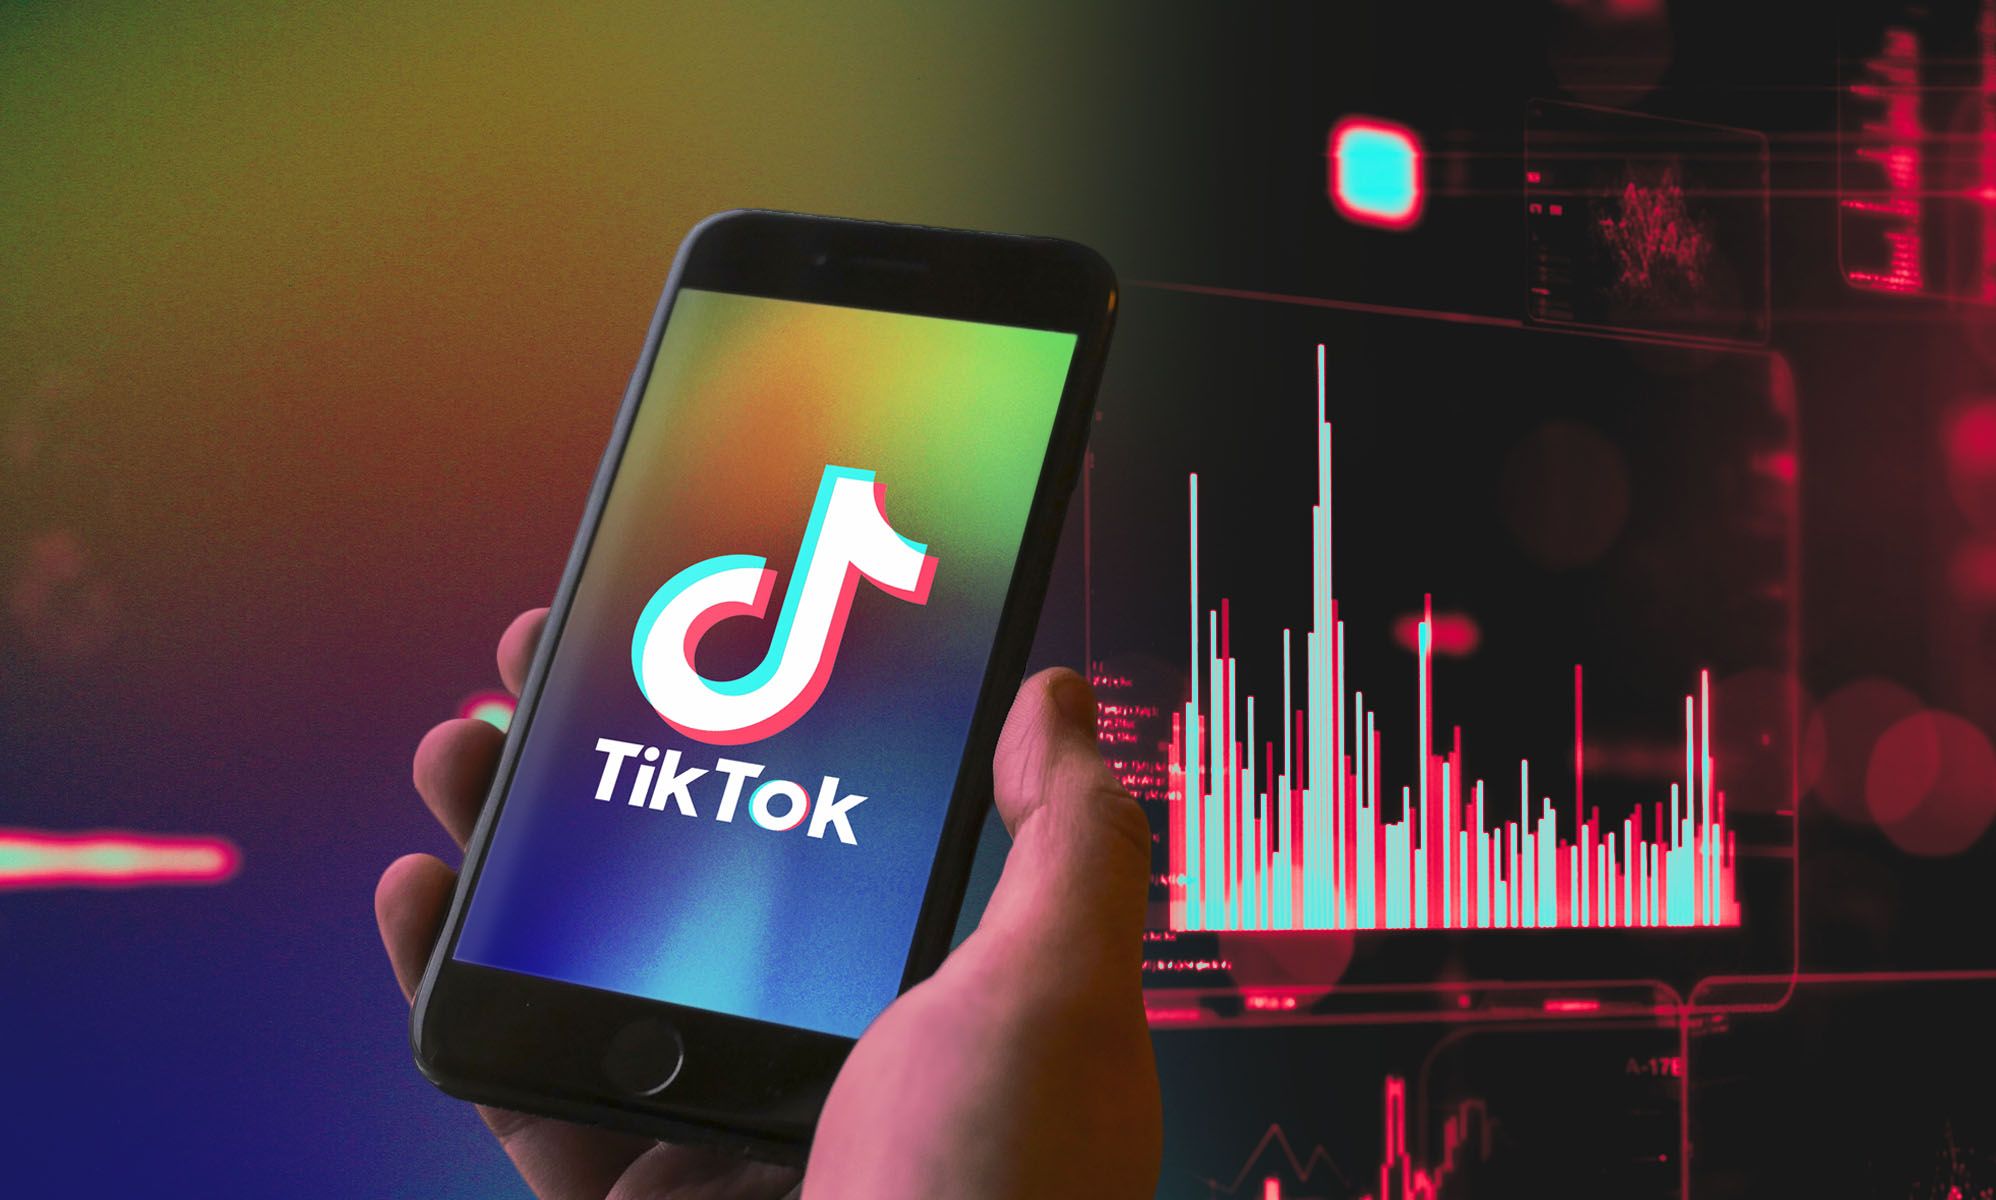 Blackmail Phone Sex Video - TikTok stored users who watched LGBTQ videos